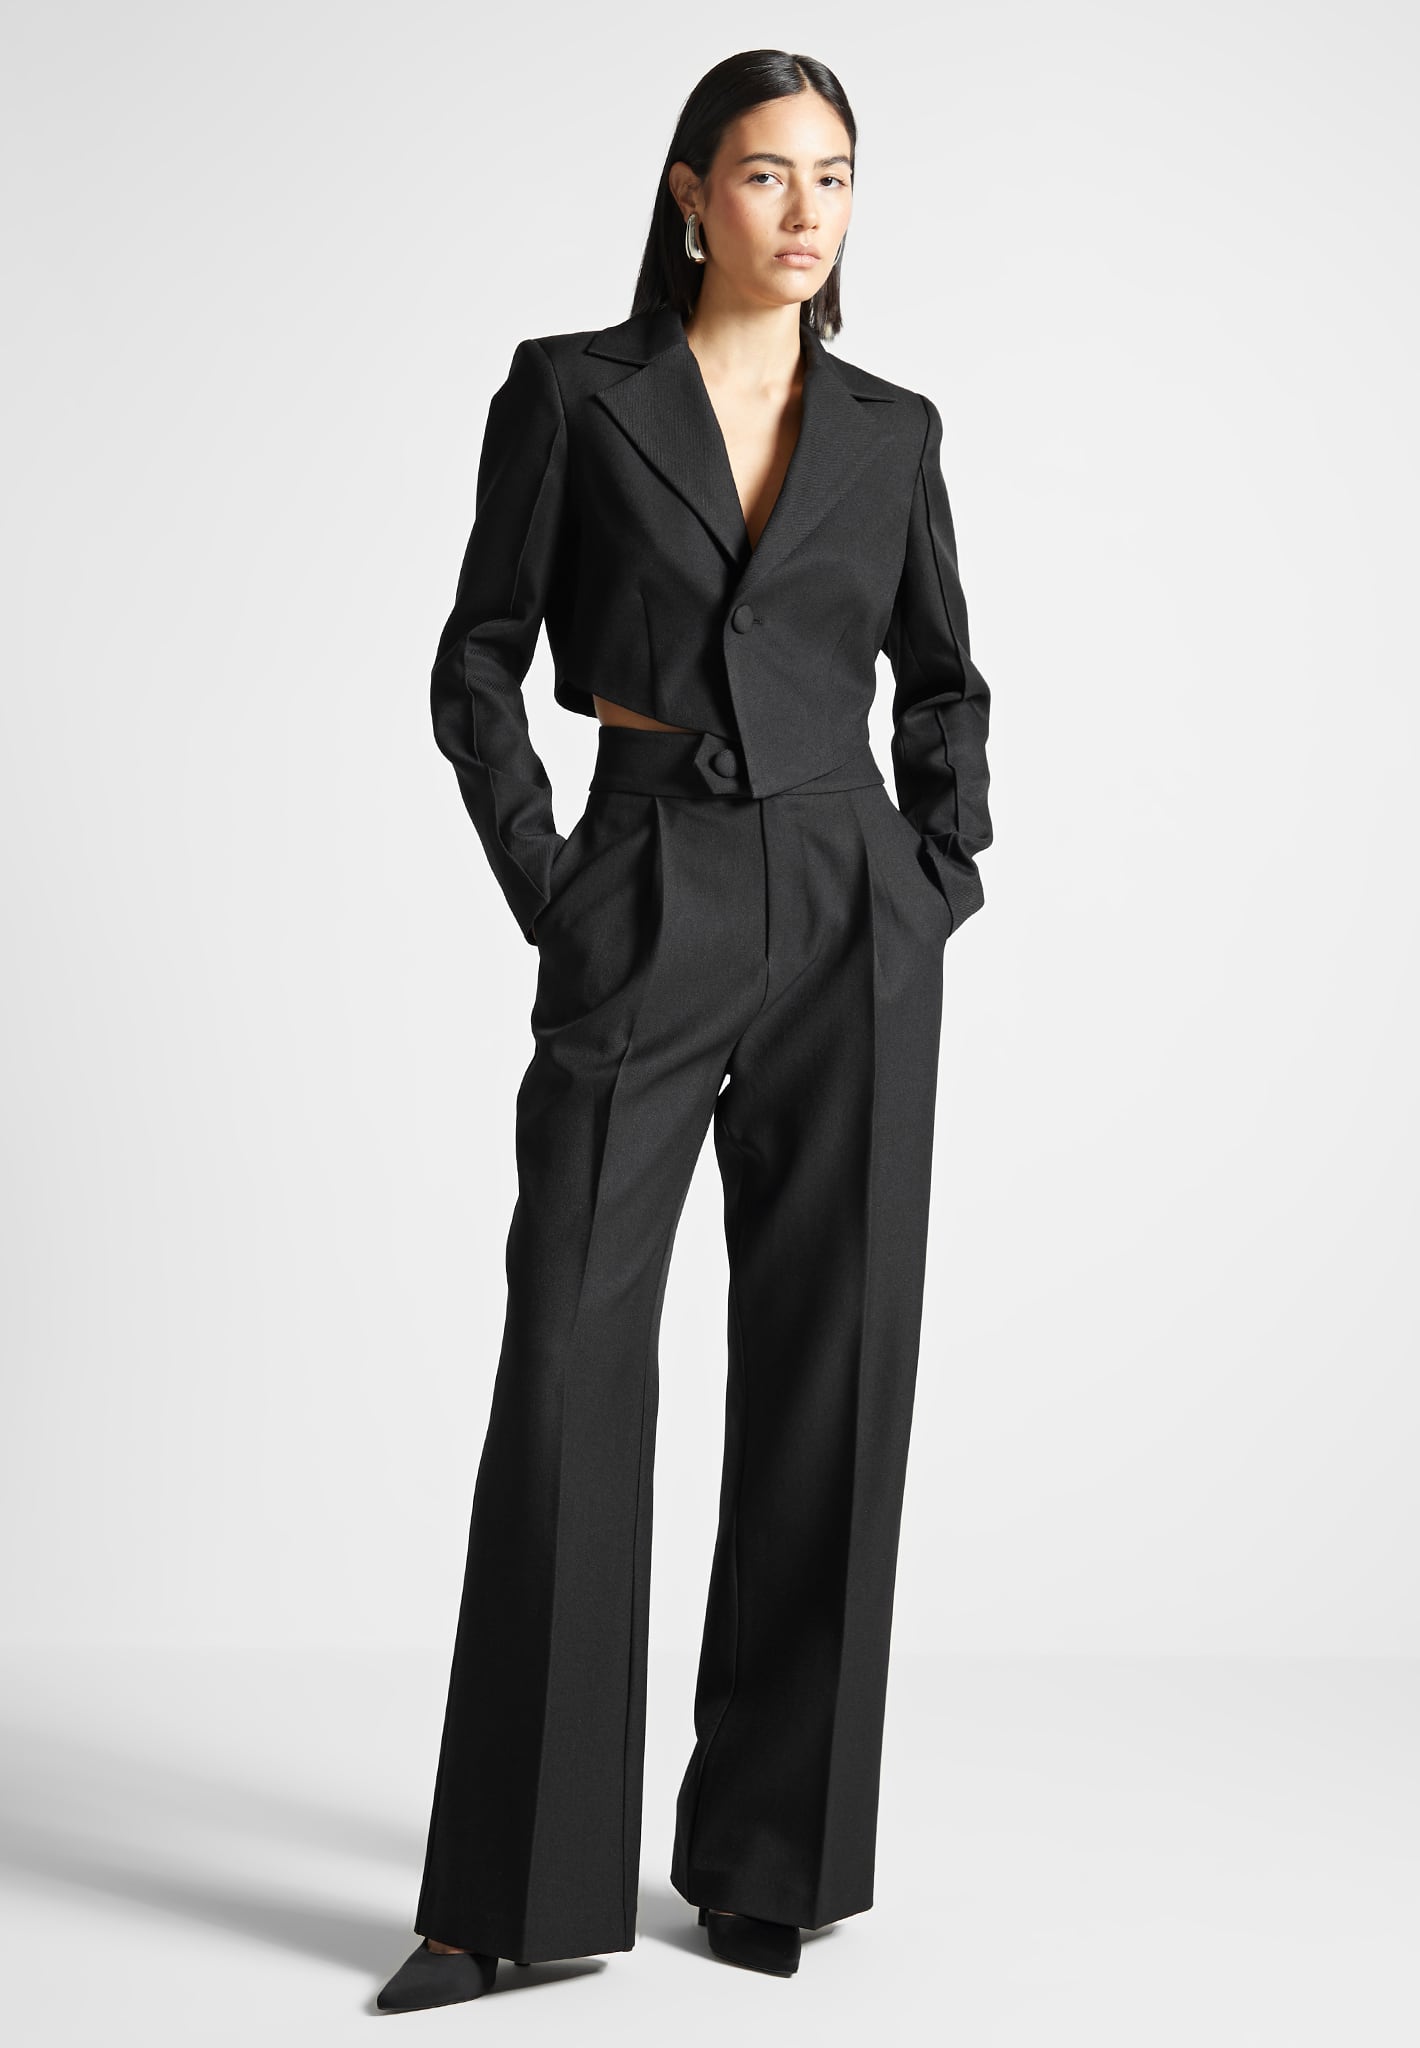 Women's Pleated Pants | Explore our New Arrivals | ZARA United States